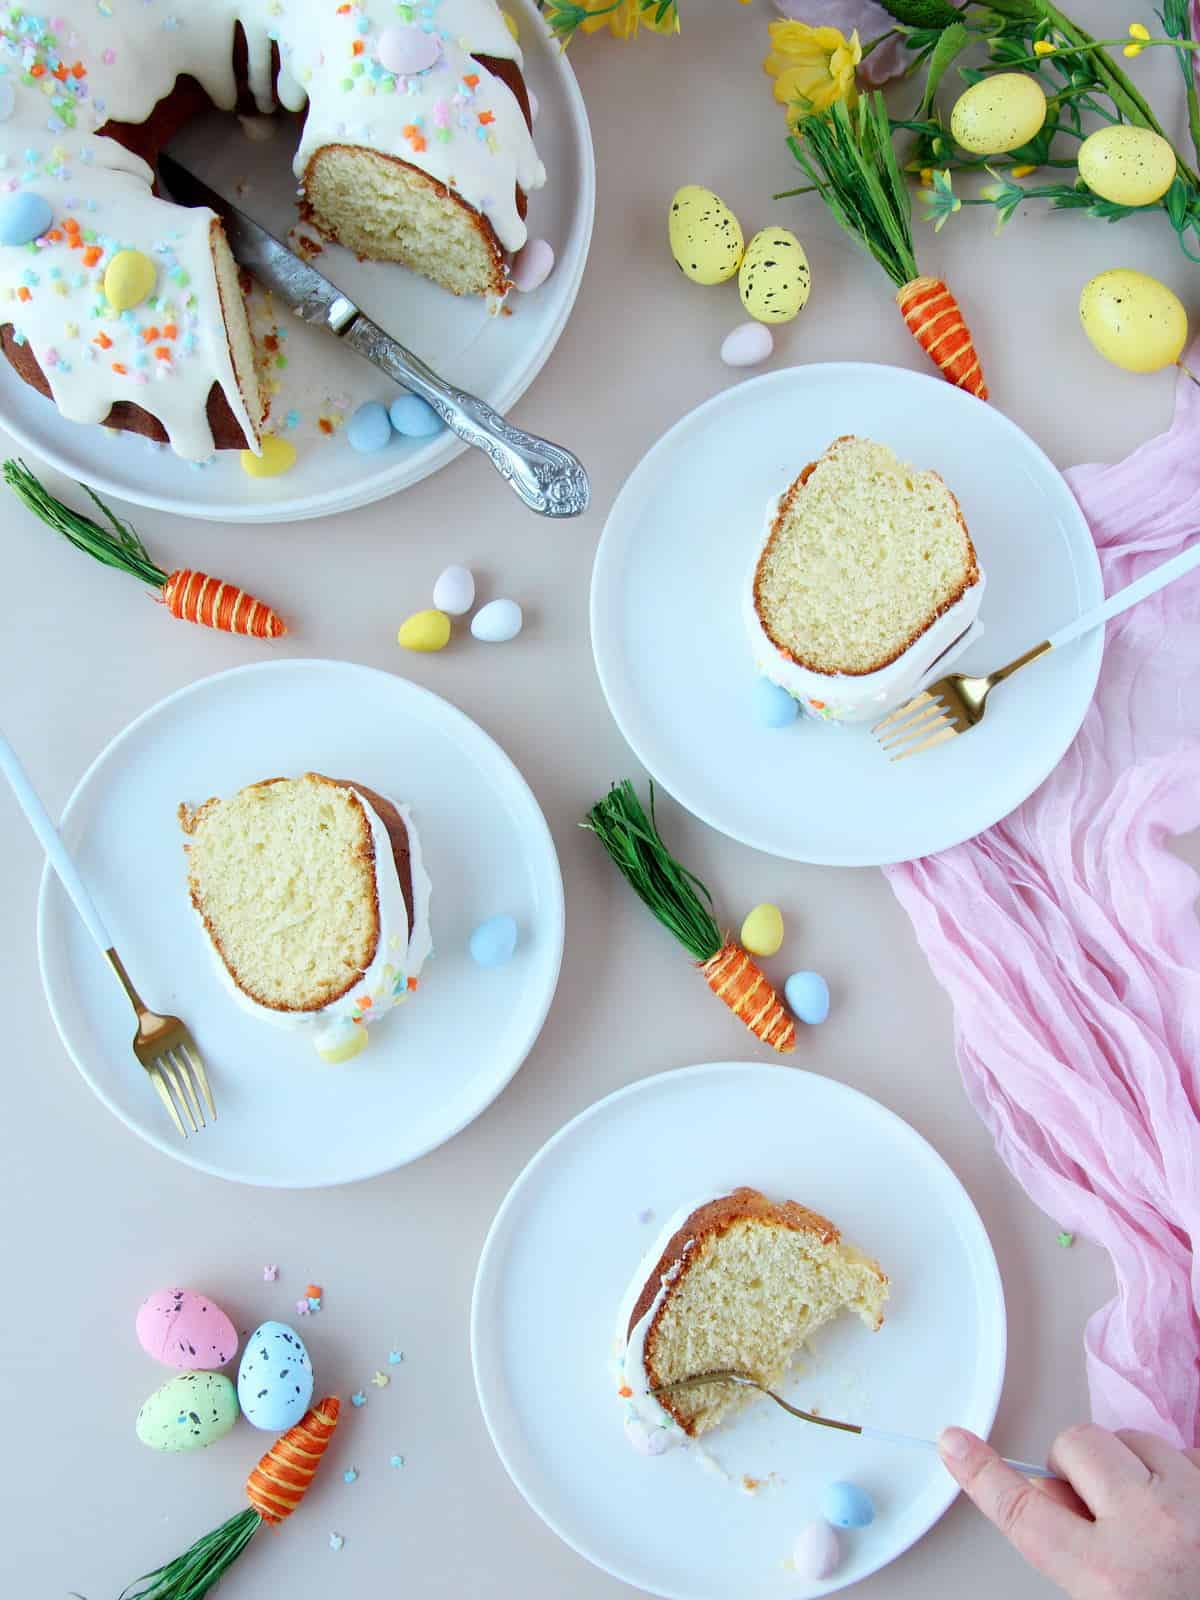 sliced of bundt cake on white plates and with white forks. Easter decoration in the background